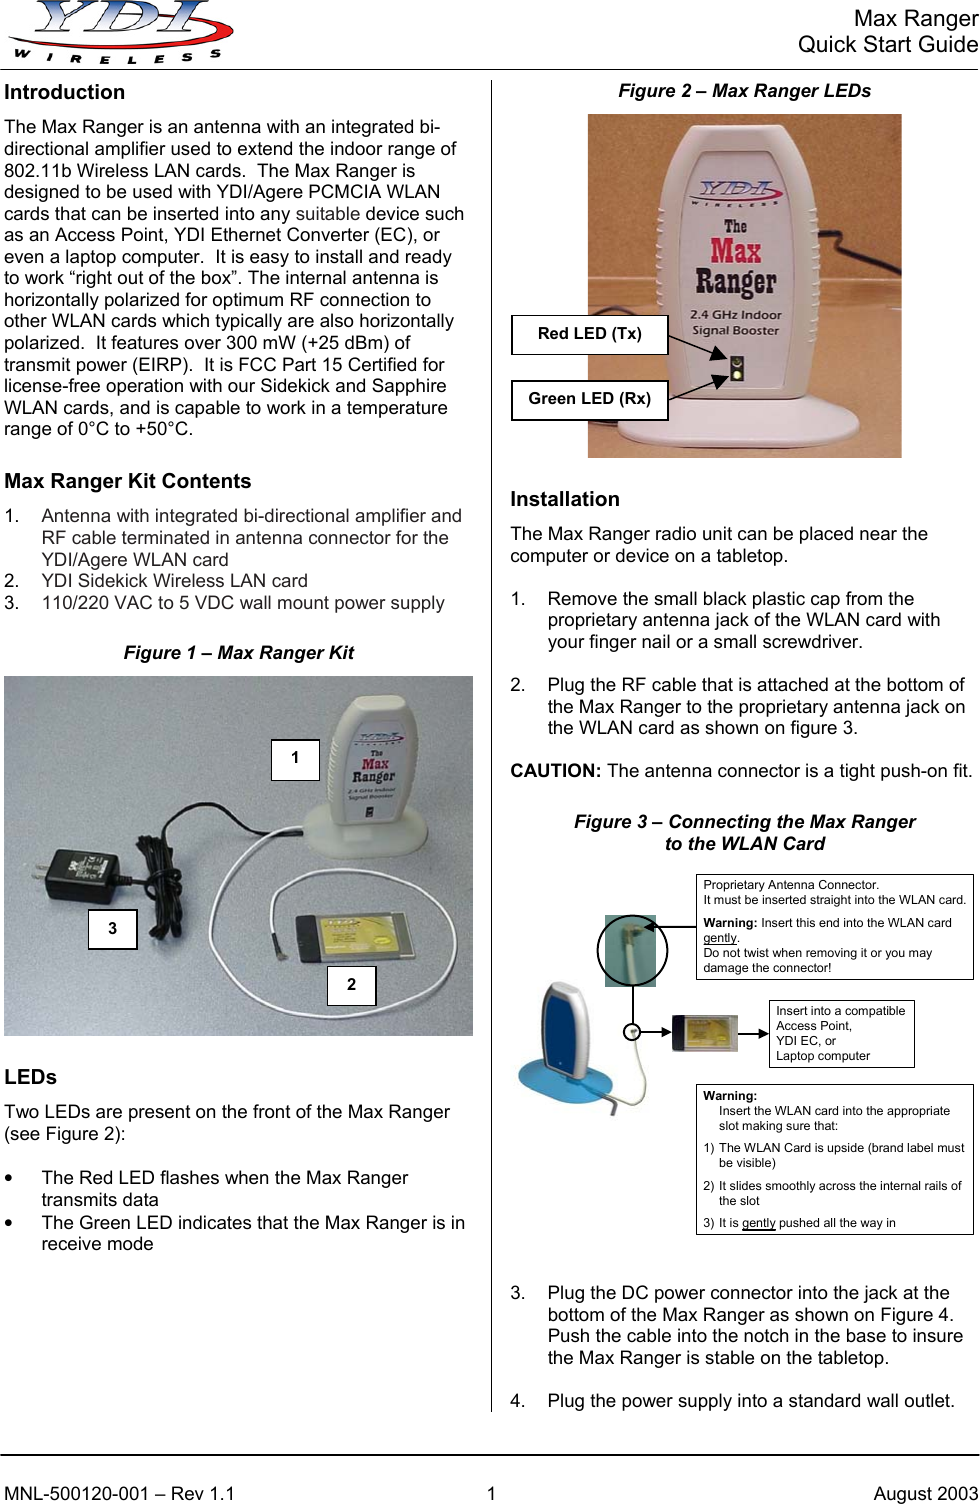   Max Ranger     Quick Start Guide Figure 2 – Max Ranger LEDs Introduction  The Max Ranger is an antenna with an integrated bi-directional amplifier used to extend the indoor range of 802.11b Wireless LAN cards.  The Max Ranger is designed to be used with YDI/Agere PCMCIA WLAN cards that can be inserted into any suitable device such as an Access Point, YDI Ethernet Converter (EC), or even a laptop computer.  It is easy to install and ready to work “right out of the box”. The internal antenna is horizontally polarized for optimum RF connection to other WLAN cards which typically are also horizontally polarized.  It features over 300 mW (+25 dBm) of transmit power (EIRP).  It is FCC Part 15 Certified for license-free operation with our Sidekick and Sapphire WLAN cards, and is capable to work in a temperature range of 0°C to +50°C. Max Ranger Kit Contents  Installation 1.  Antenna with integrated bi-directional amplifier and RF cable terminated in antenna connector for the YDI/Agere WLAN card The Max Ranger radio unit can be placed near the computer or device on a tabletop.  2.  YDI Sidekick Wireless LAN card 1.  Remove the small black plastic cap from the proprietary antenna jack of the WLAN card with your finger nail or a small screwdriver. 3.  110/220 VAC to 5 VDC wall mount power supply Figure 1 – Max Ranger Kit   2.  Plug the RF cable that is attached at the bottom of the Max Ranger to the proprietary antenna jack on the WLAN card as shown on figure 3.   CAUTION: The antenna connector is a tight push-on fit. Figure 3 – Connecting the Max Ranger to the WLAN Card Warning:Insert the WLAN card into the appropriate slot making sure that:1) The WLAN Card is upside (brand label must be visible)2) It slides smoothly across the internal rails of the slot3) It is gently pushed all the way inProprietary Antenna Connector.It must be inserted straight into the WLAN card.Warning: Insert this end into the WLAN card gently.Do not twist when removing it or you may damage the connector!Insert into a compatible Access Point,YDI EC, orLaptop computer LEDs Two LEDs are present on the front of the Max Ranger (see Figure 2):  •  The Red LED flashes when the Max Ranger transmits data •  The Green LED indicates that the Max Ranger is in receive mode          3.  Plug the DC power connector into the jack at the bottom of the Max Ranger as shown on Figure 4.  Push the cable into the notch in the base to insure the Max Ranger is stable on the tabletop.  4.  Plug the power supply into a standard wall outlet. Red LED (Tx) Green LED (Rx)2 1 3 MNL-500120-001 – Rev 1.1  1  August 2003 